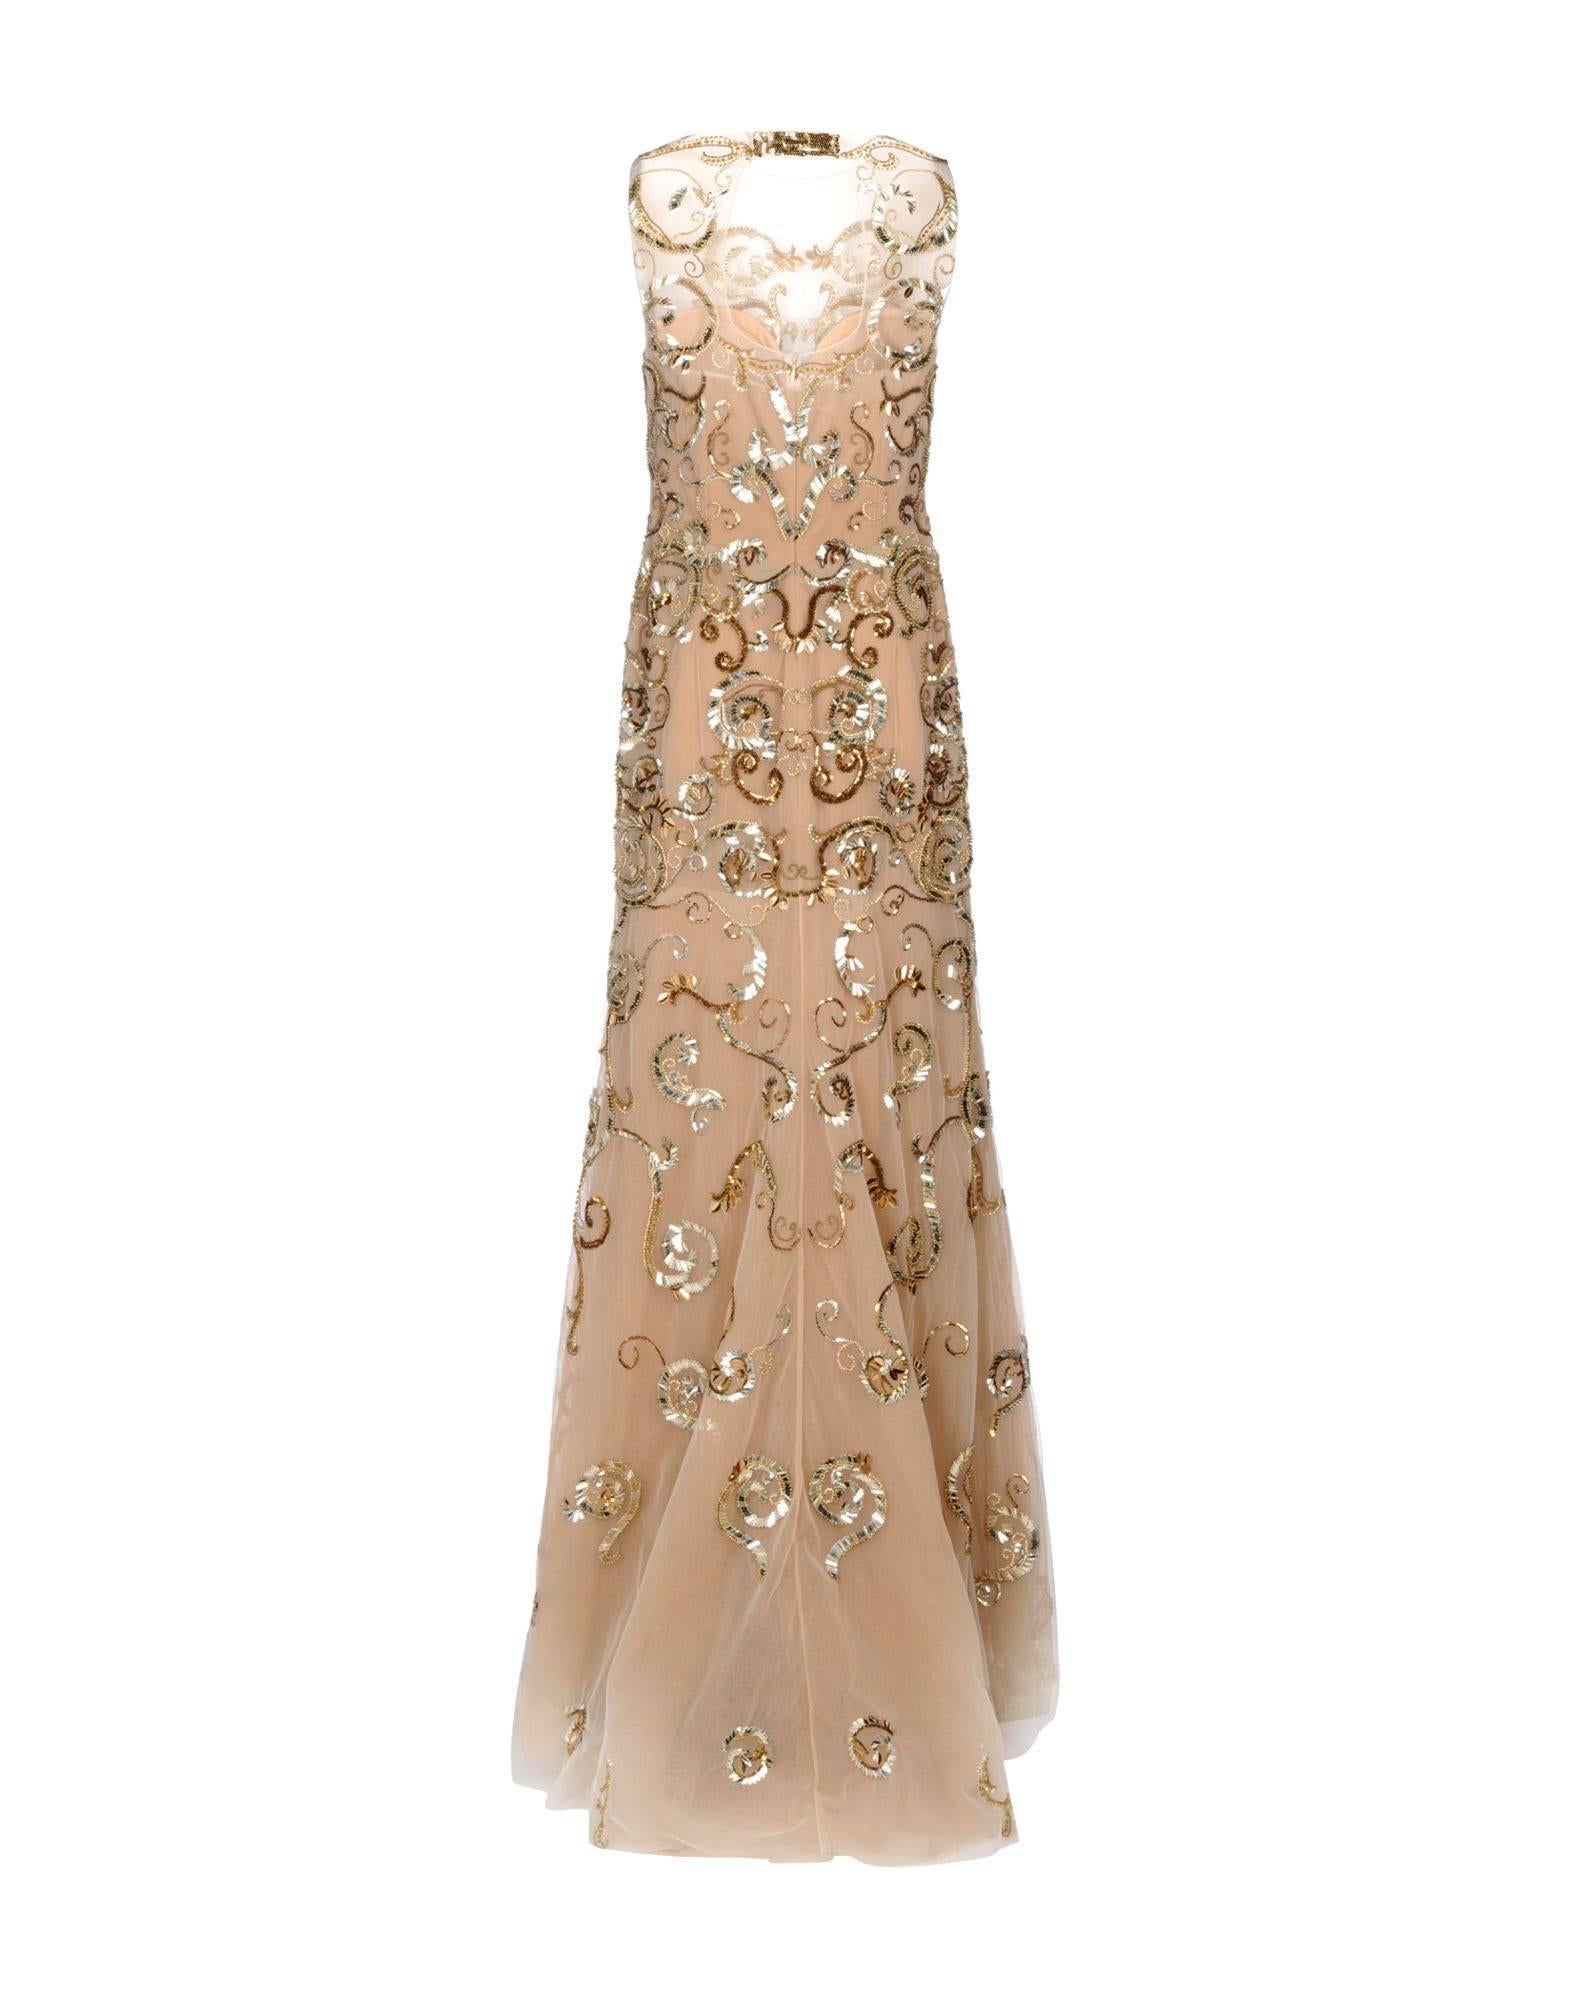 New ZUHAIR MURAD Nude Embellished Dress Gown
Designer size 44 
Tulle Nude color with gold sequins and beads embellishment 
50% Silk, 50% Polyamide
Layered skirt, Fully lined, Back zip closure, Corset style.
Length - 67 inches, Waist - 30, Bust -